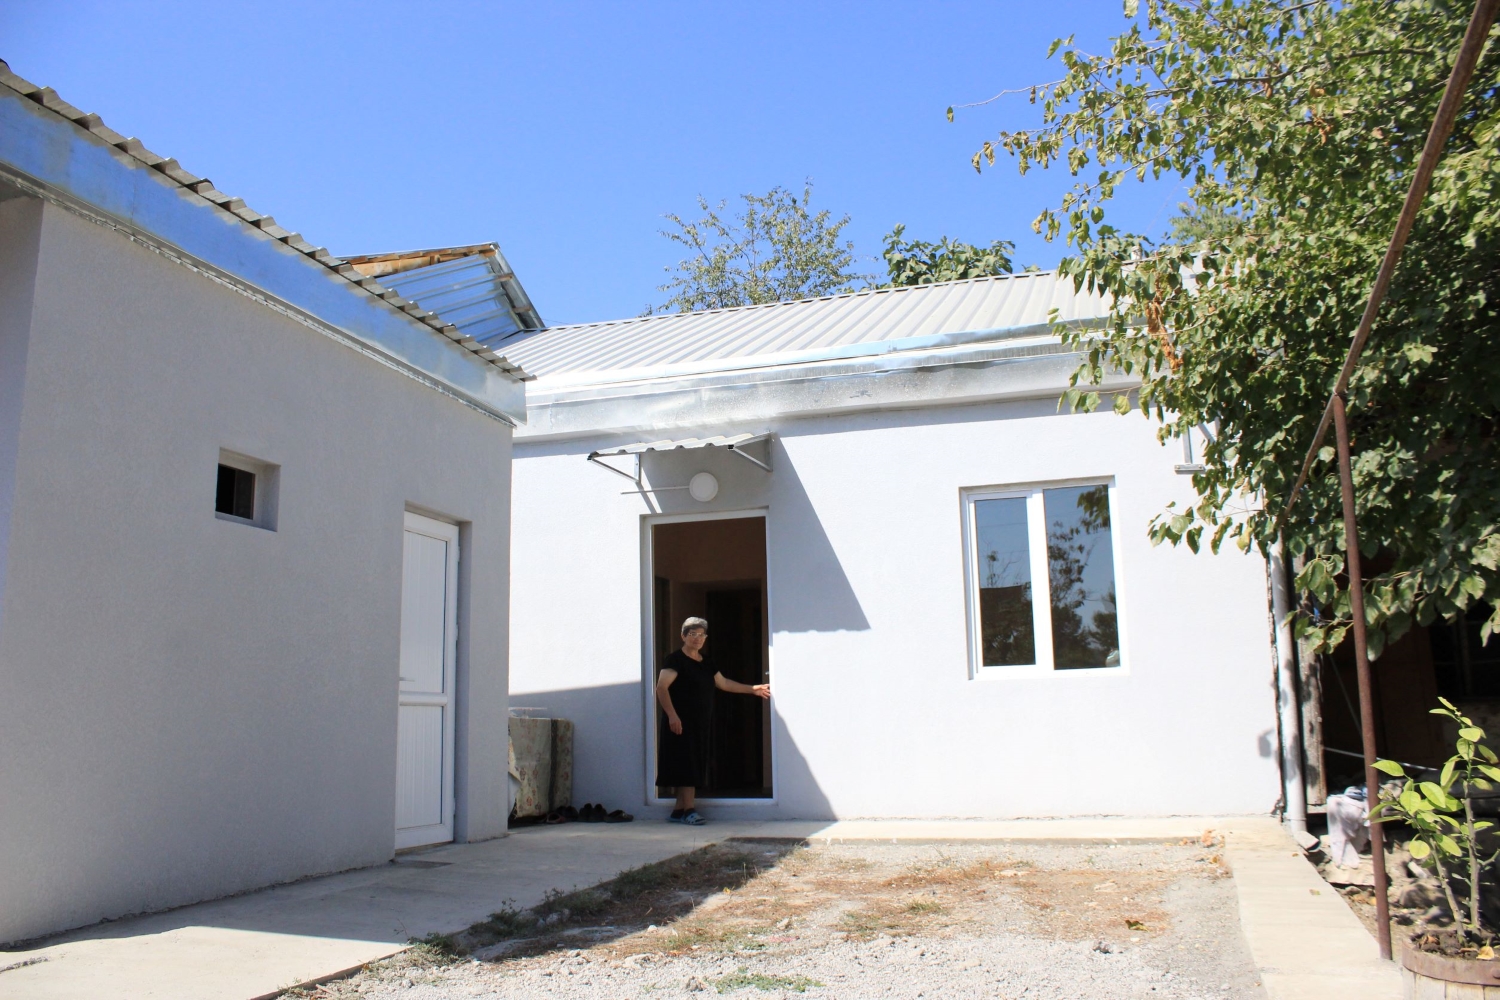 Wounded Artsakh Vet’s Home Rebuilt Following Successful Crowdfunding Campaign 